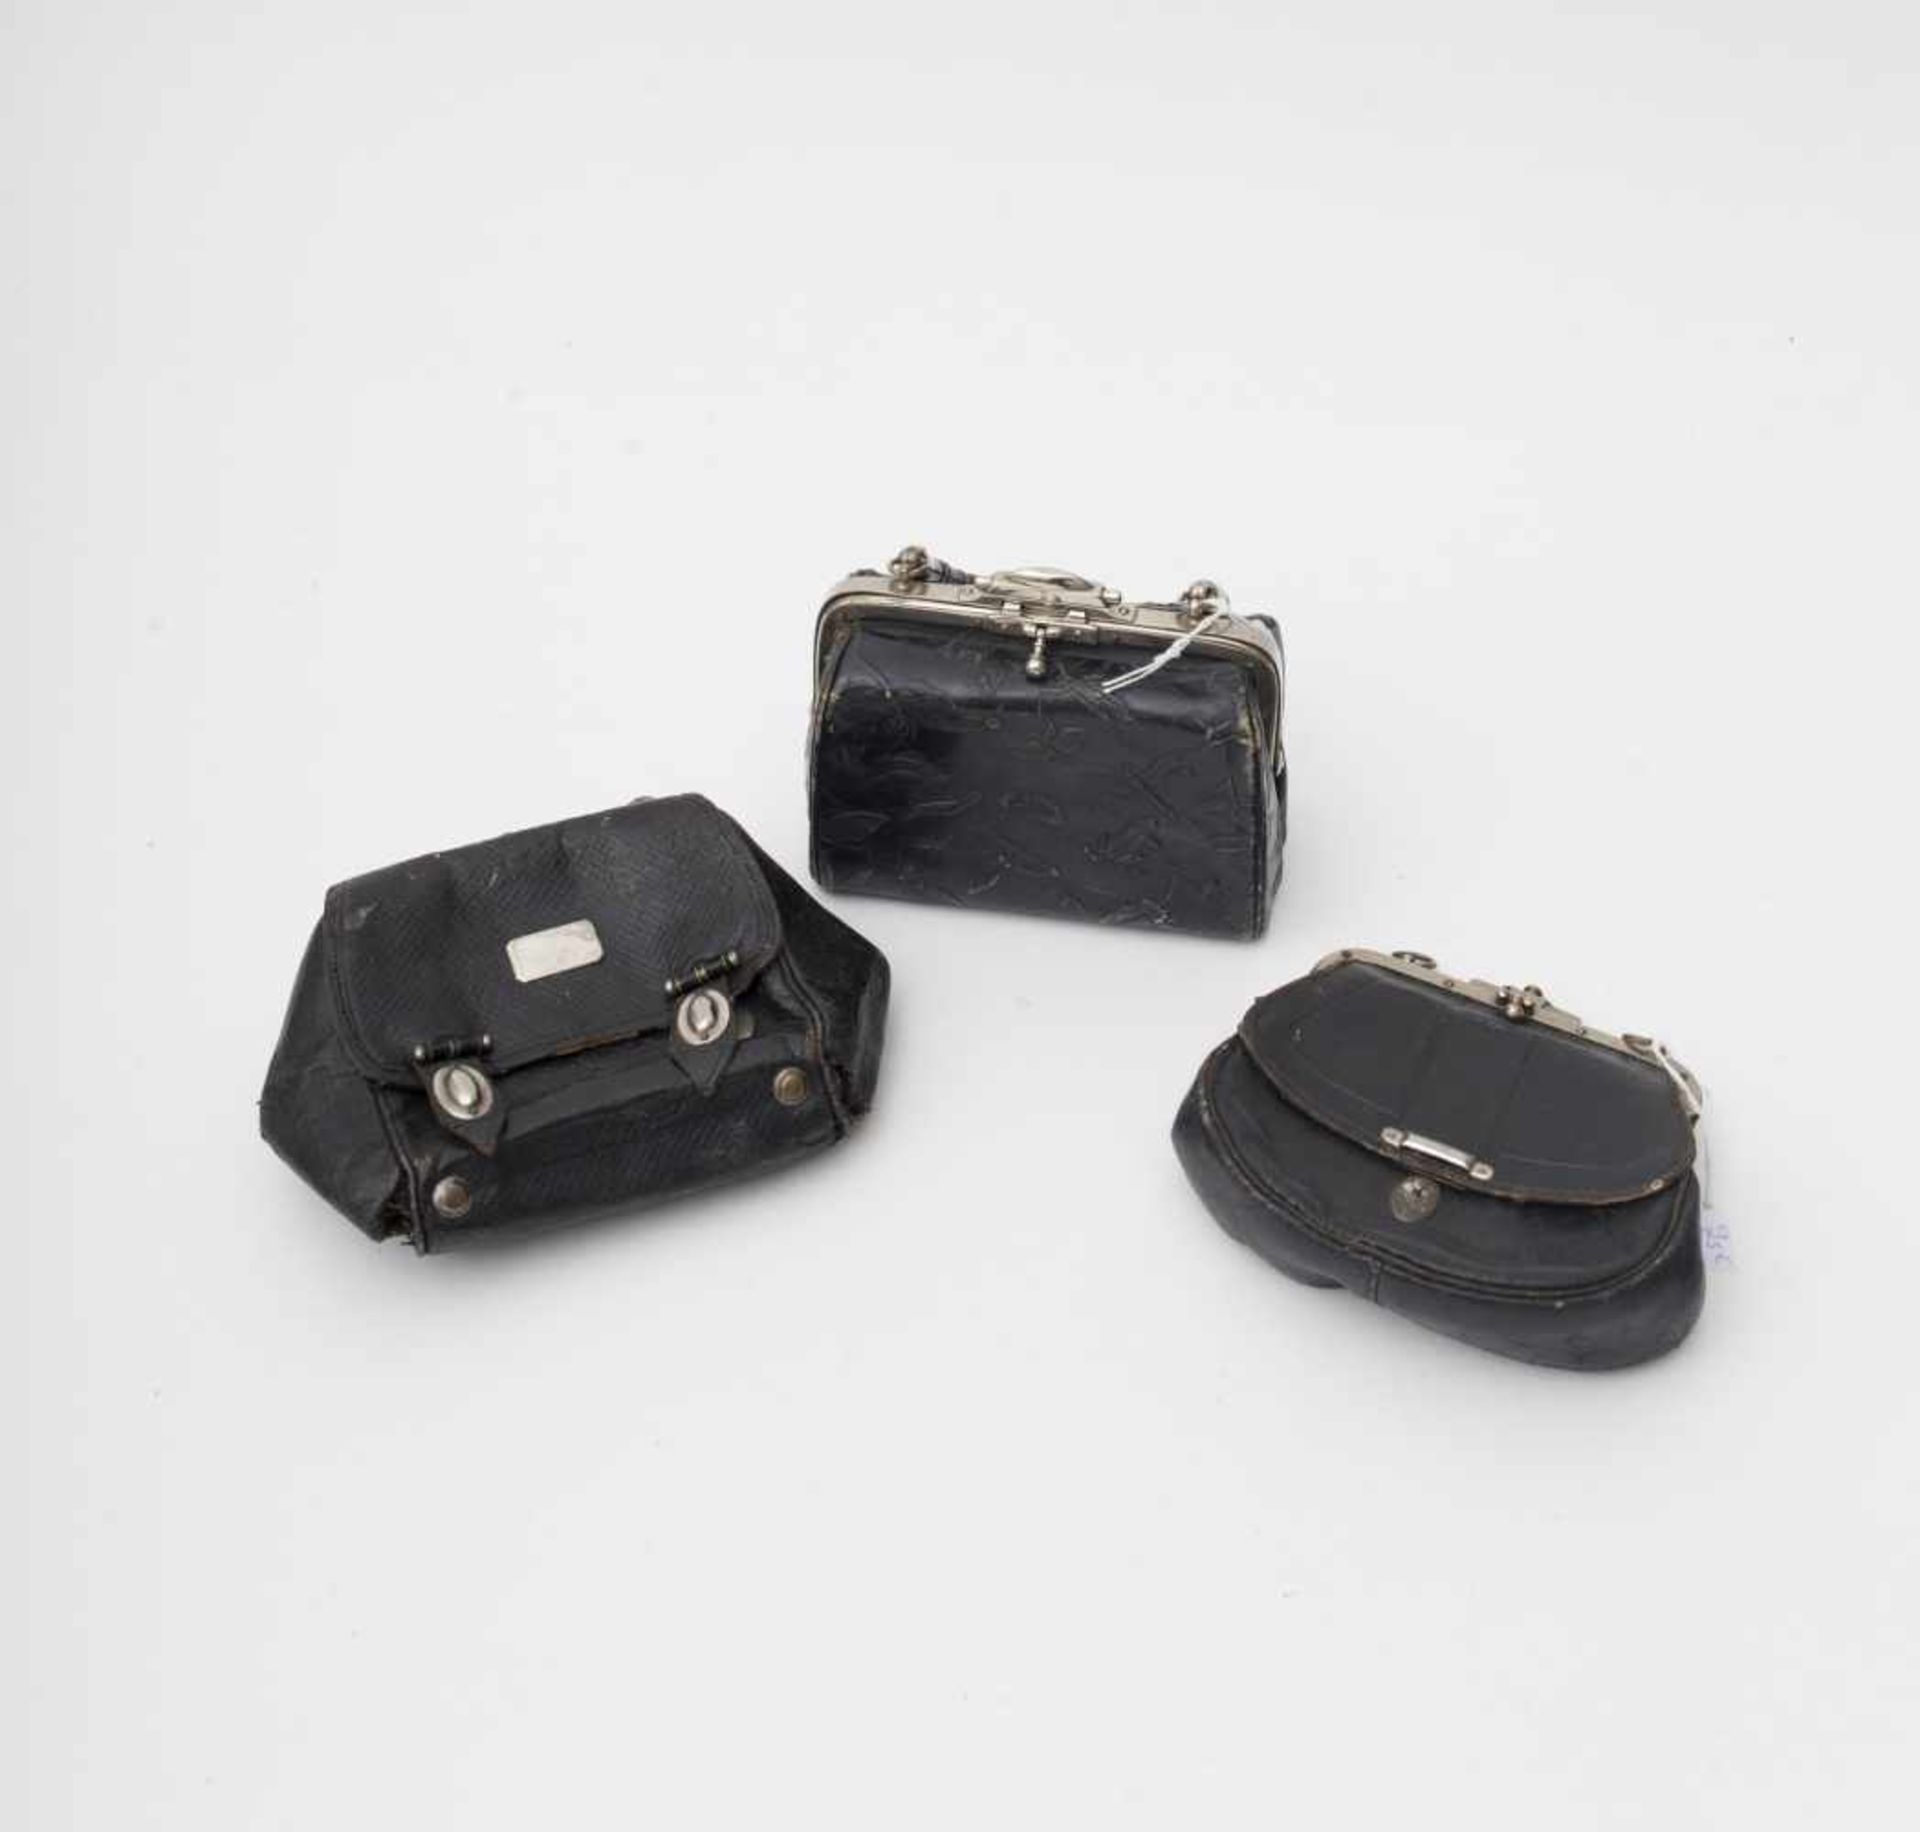 Set of accessories For large dolls, comprised of 3 early 20th century leather bags.